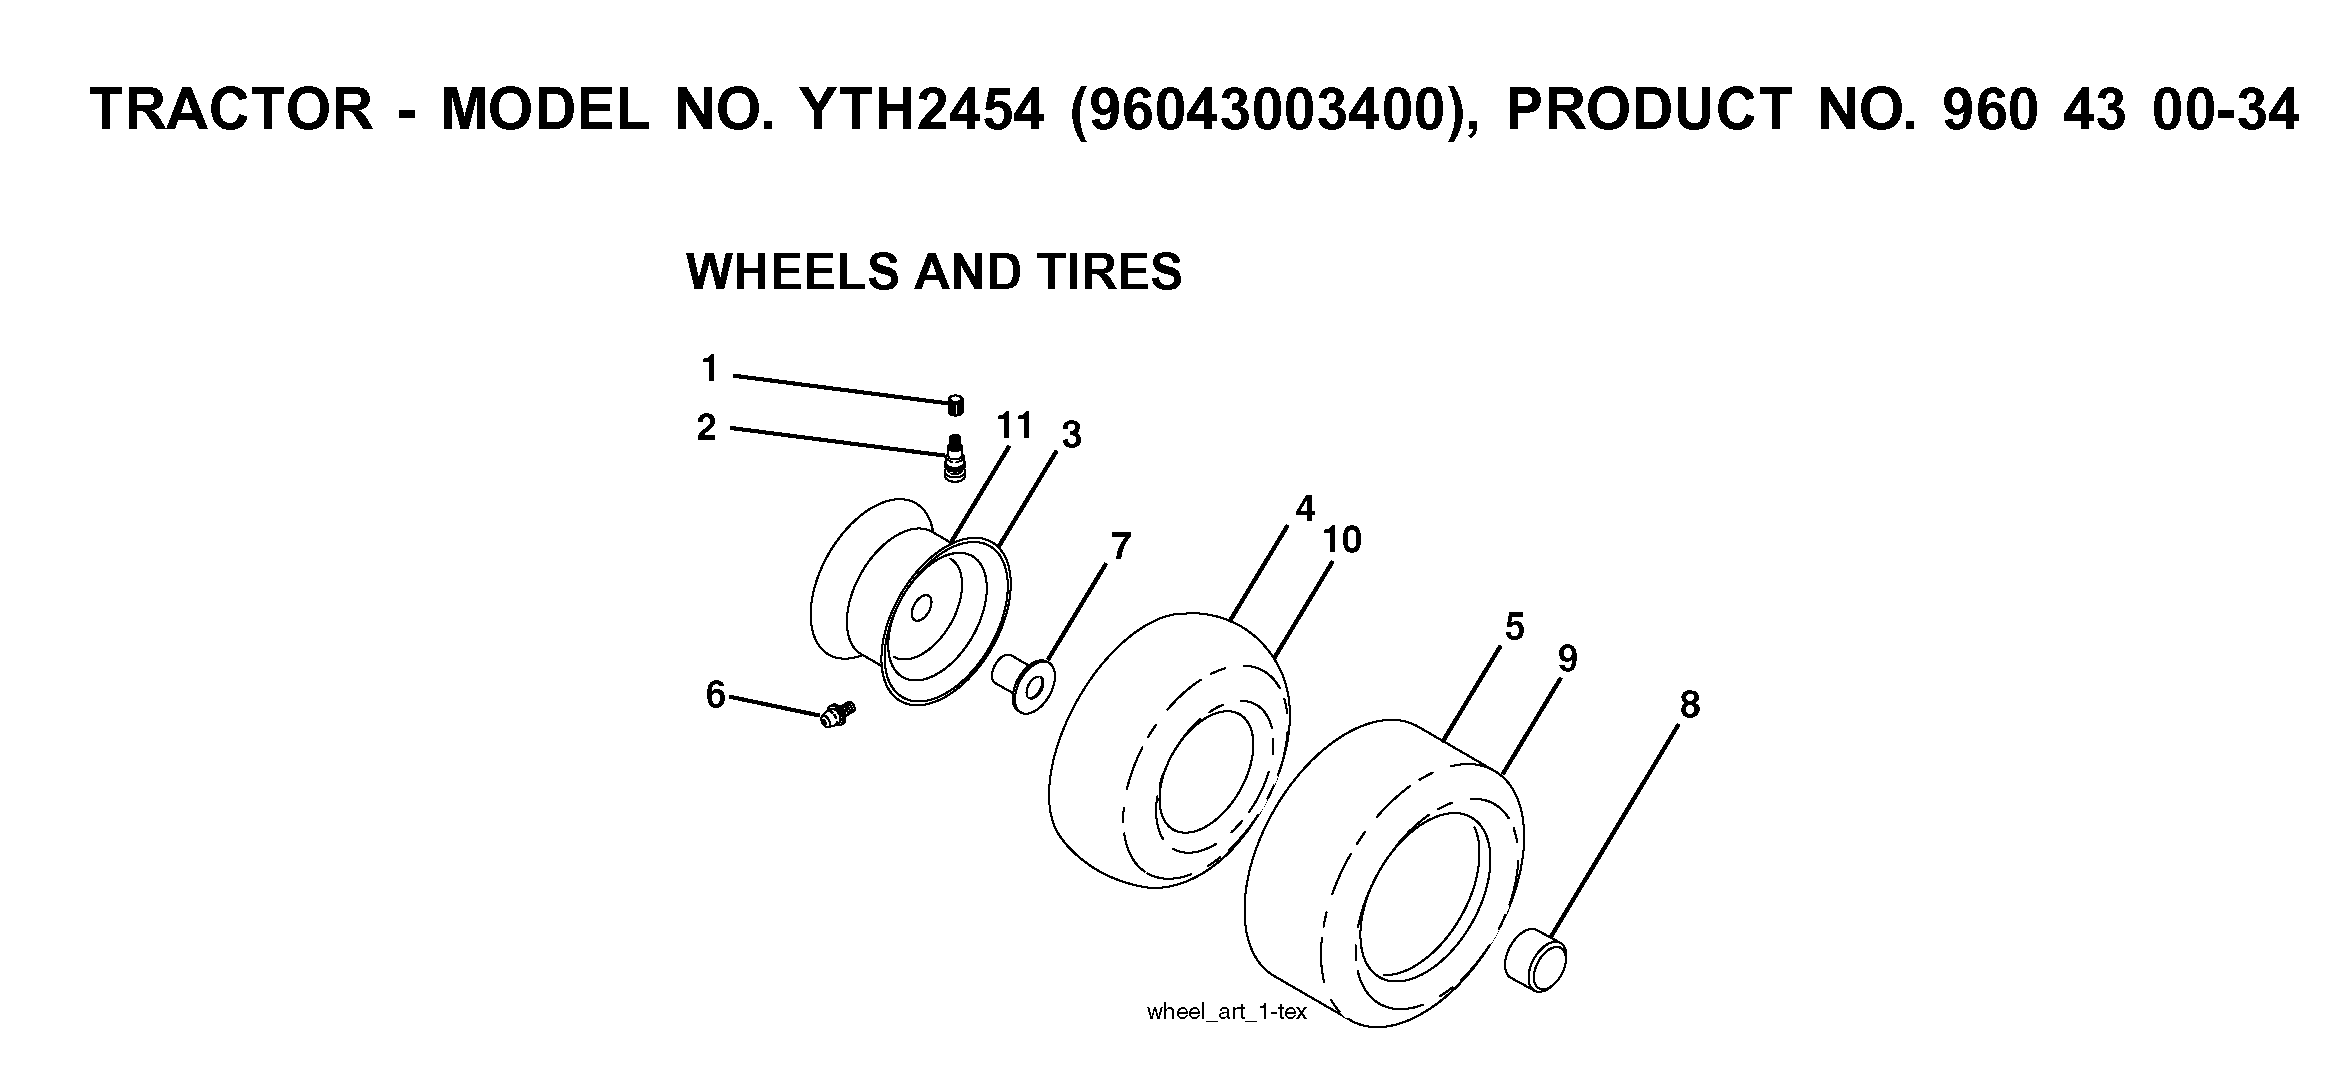 Wheels and tires 532059192, 532065139, 532148736, 532059904, 532106230, 532000278, 532009040, 532104757, 532125833, 532007152, 532106108, 576707201